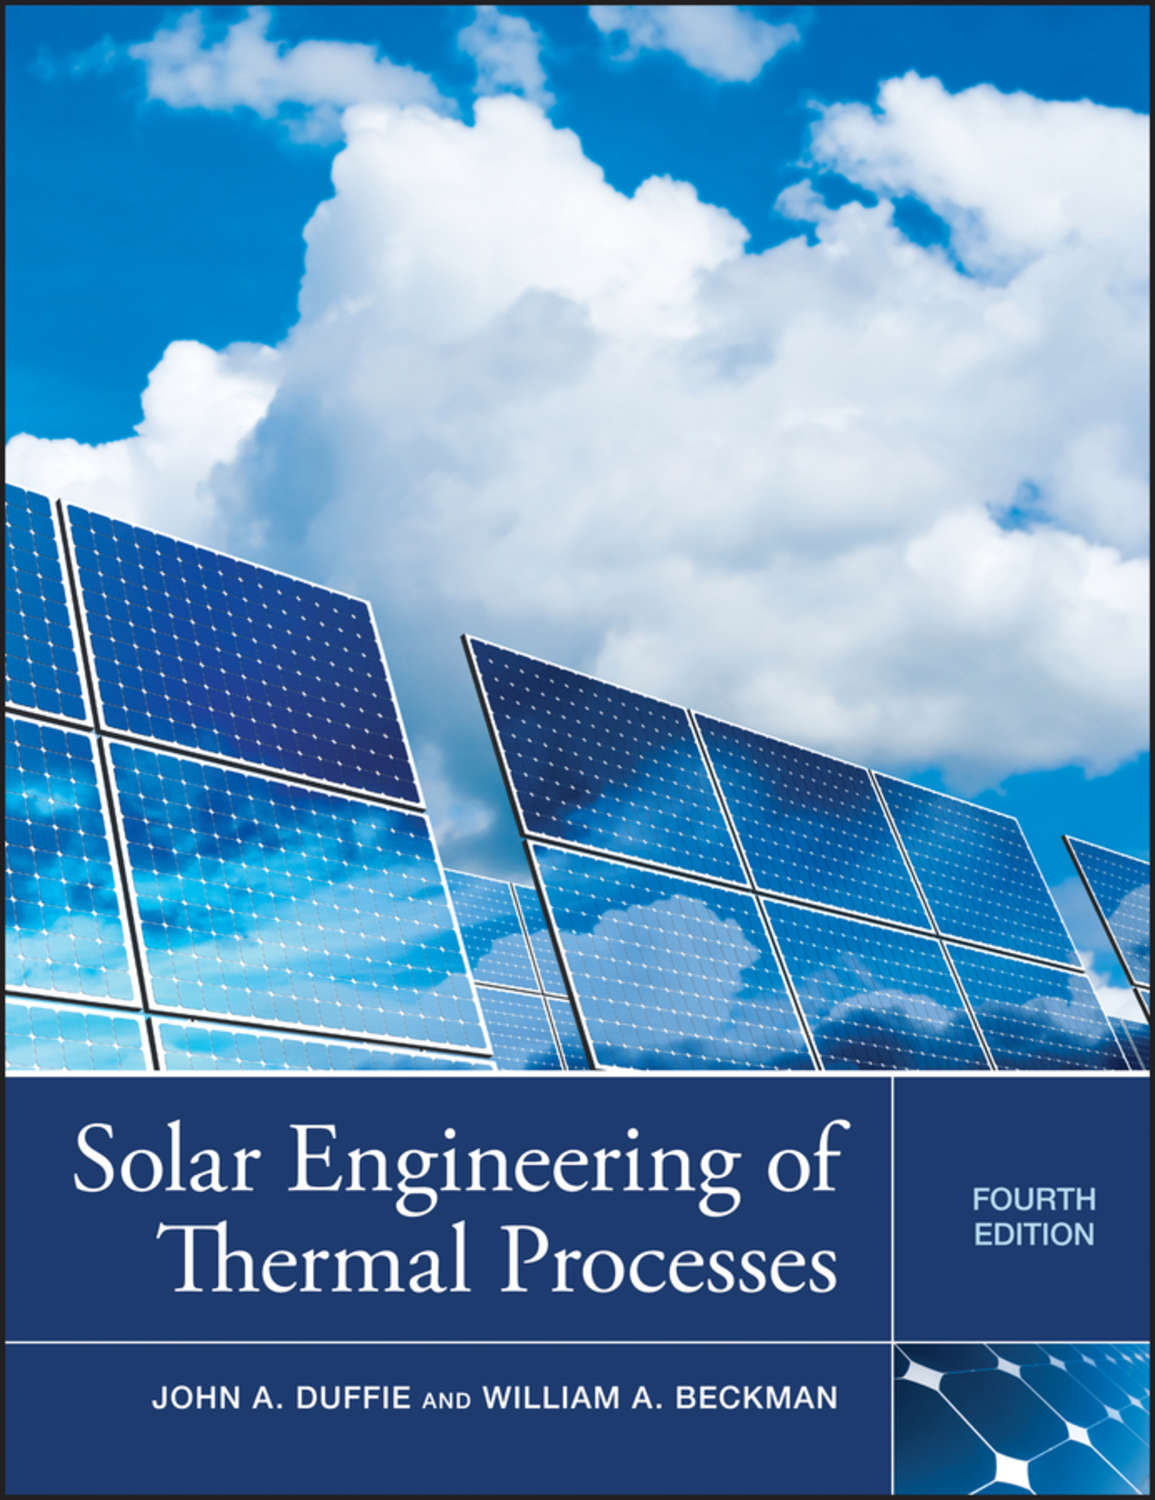 case study of thermal engineering